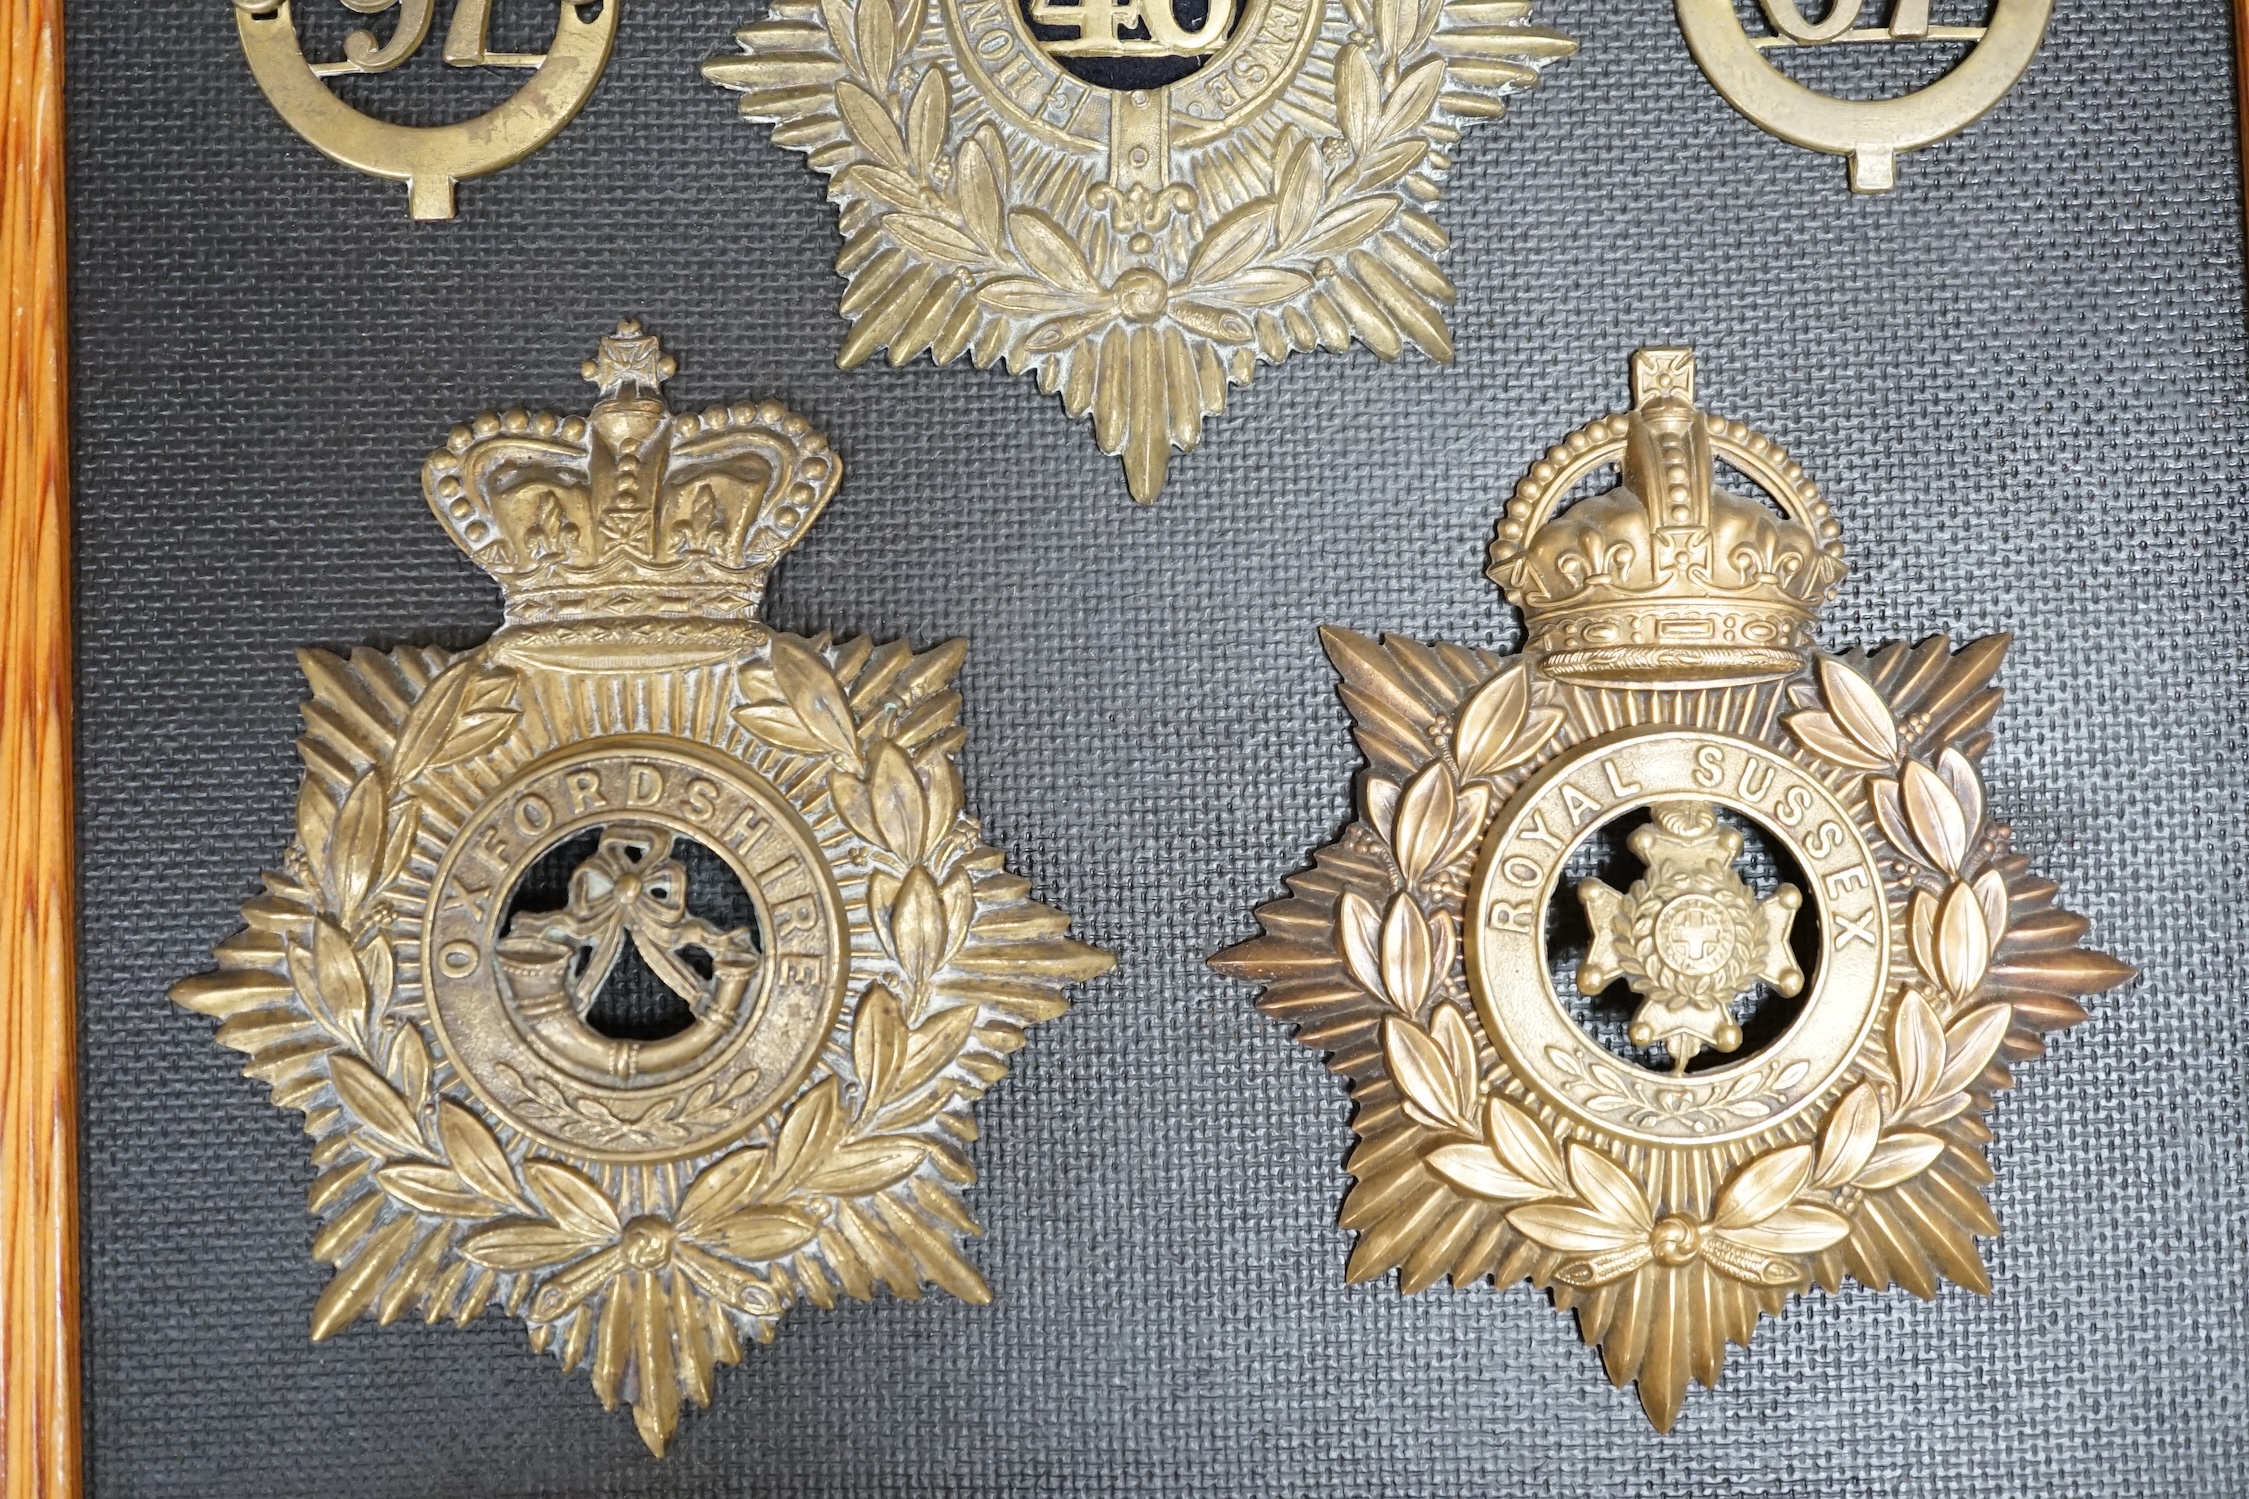 Five military helmet plates and two other centre badges mounted on a board, including; the Royal Lancashire Regiment, the Royal Lancashire 1st Volunteer Battalion, the Oxfordshire Regiment, the Royal Sussex Regiment, etc